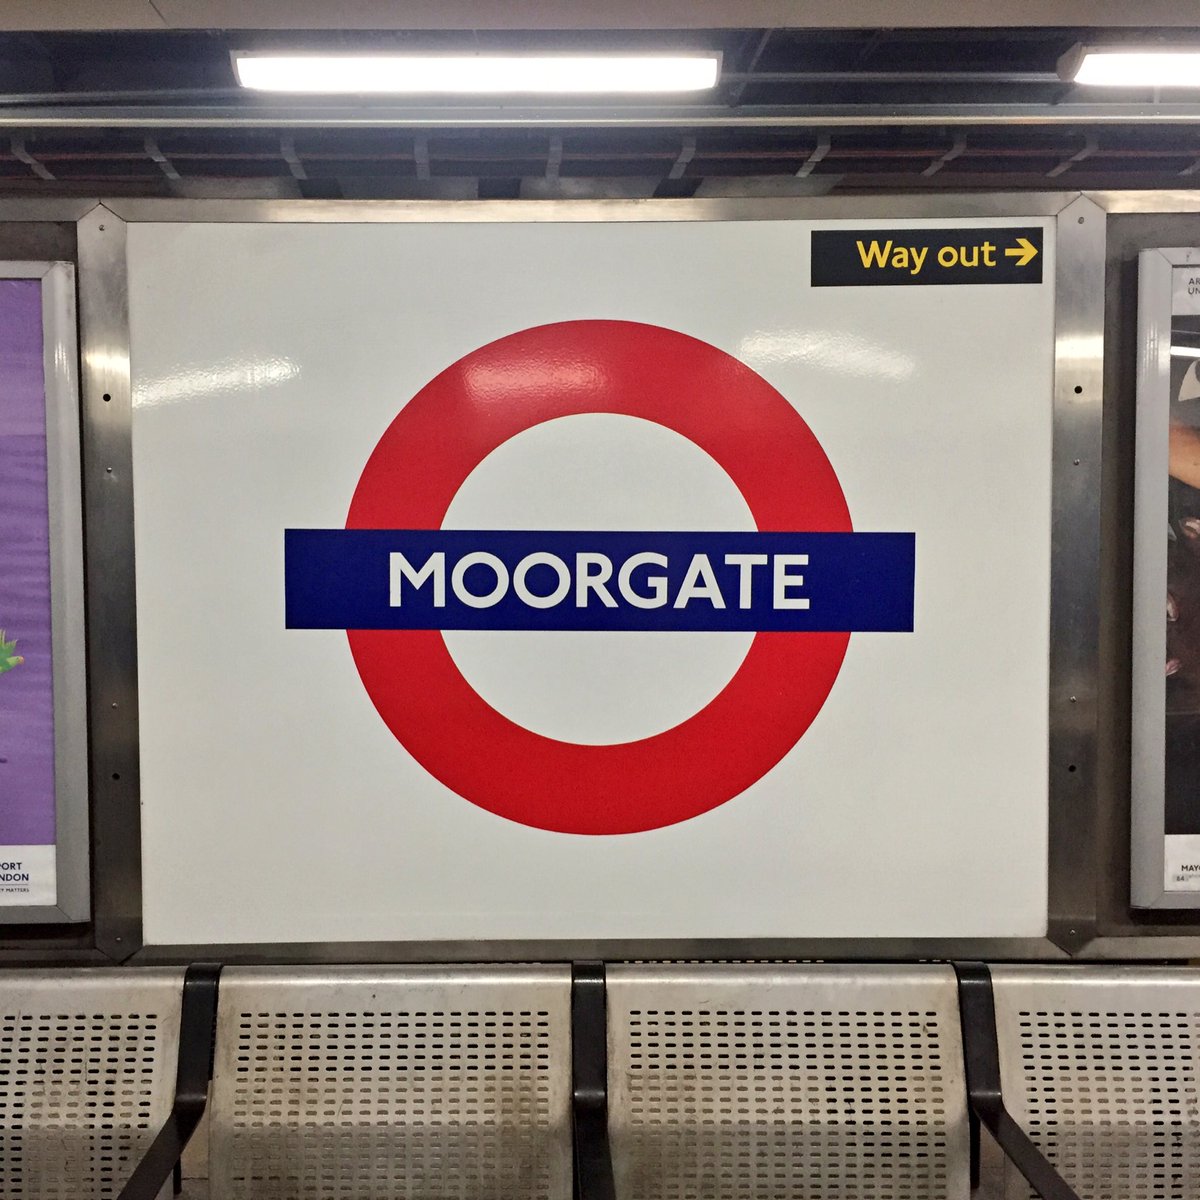 I have been asked an interesting question. Why does London’s Moorgate tube station have a mix of “traditional” bar-and-Circle roundels... and weird diamonds? Well... (1/6)